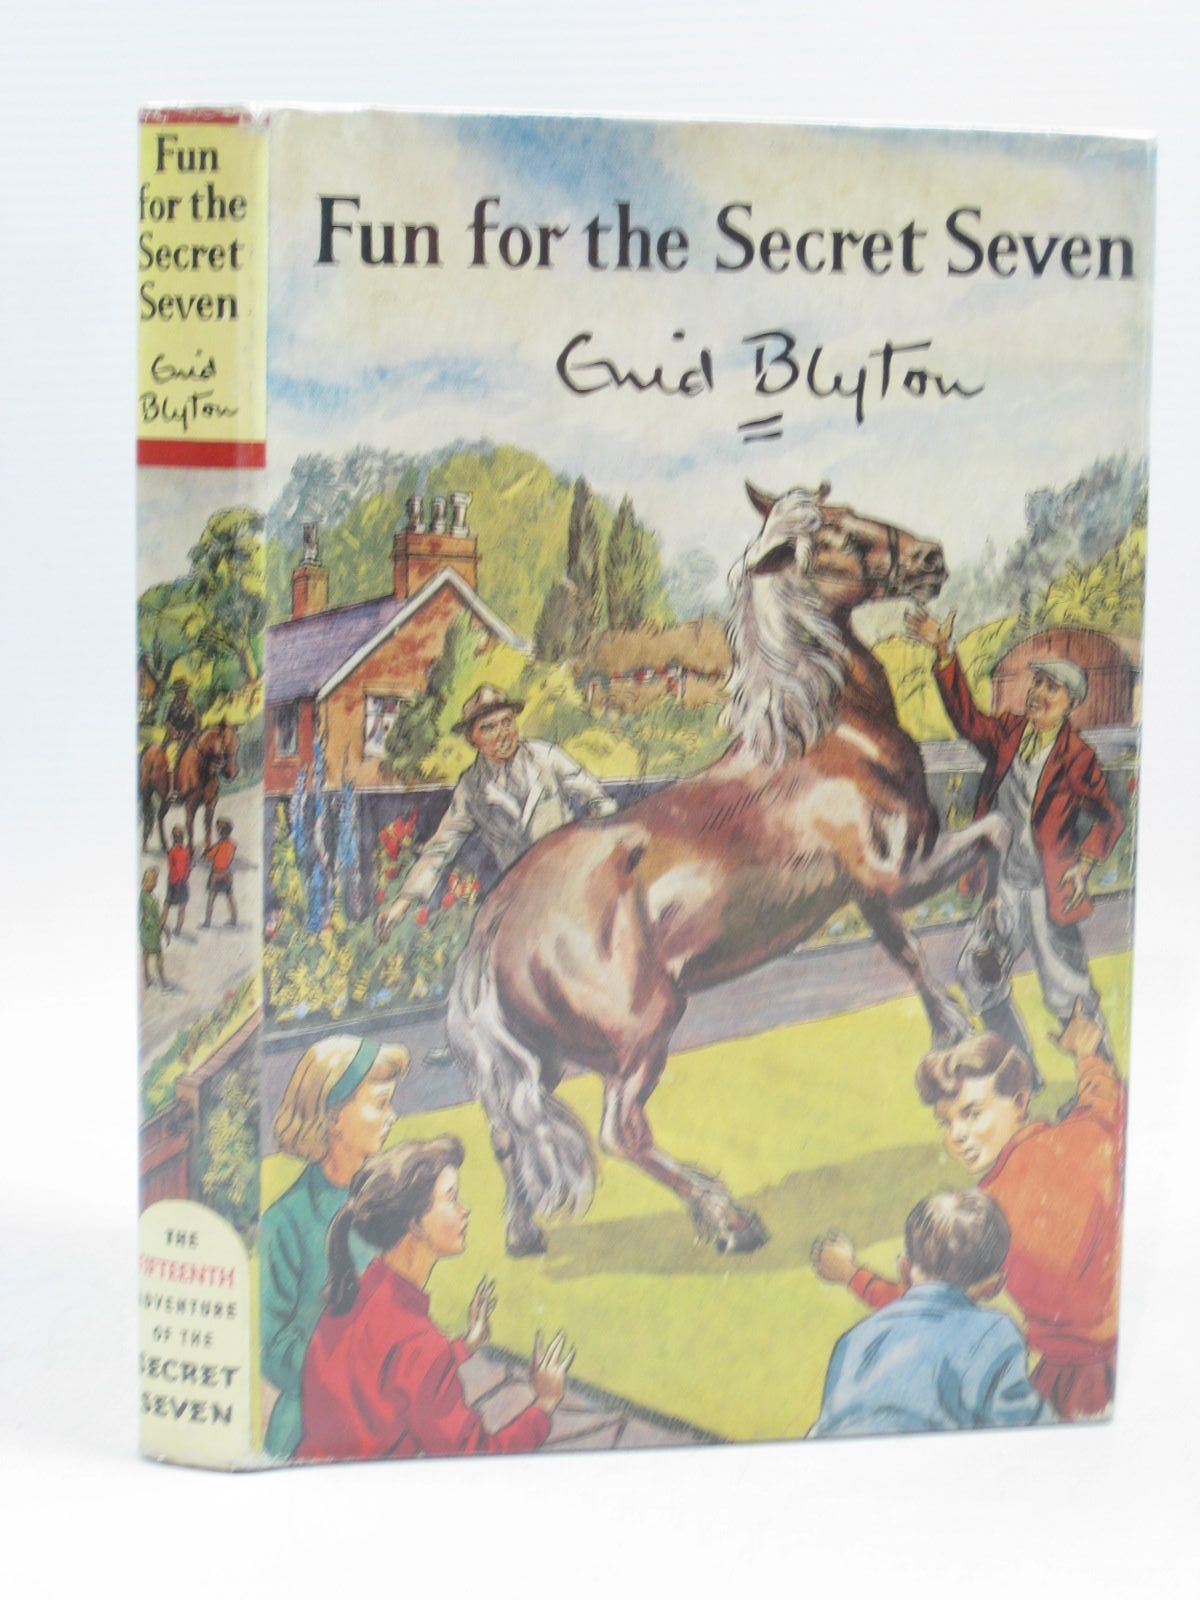 Cover of FUN FOR THE SECRET SEVEN by Enid Blyton